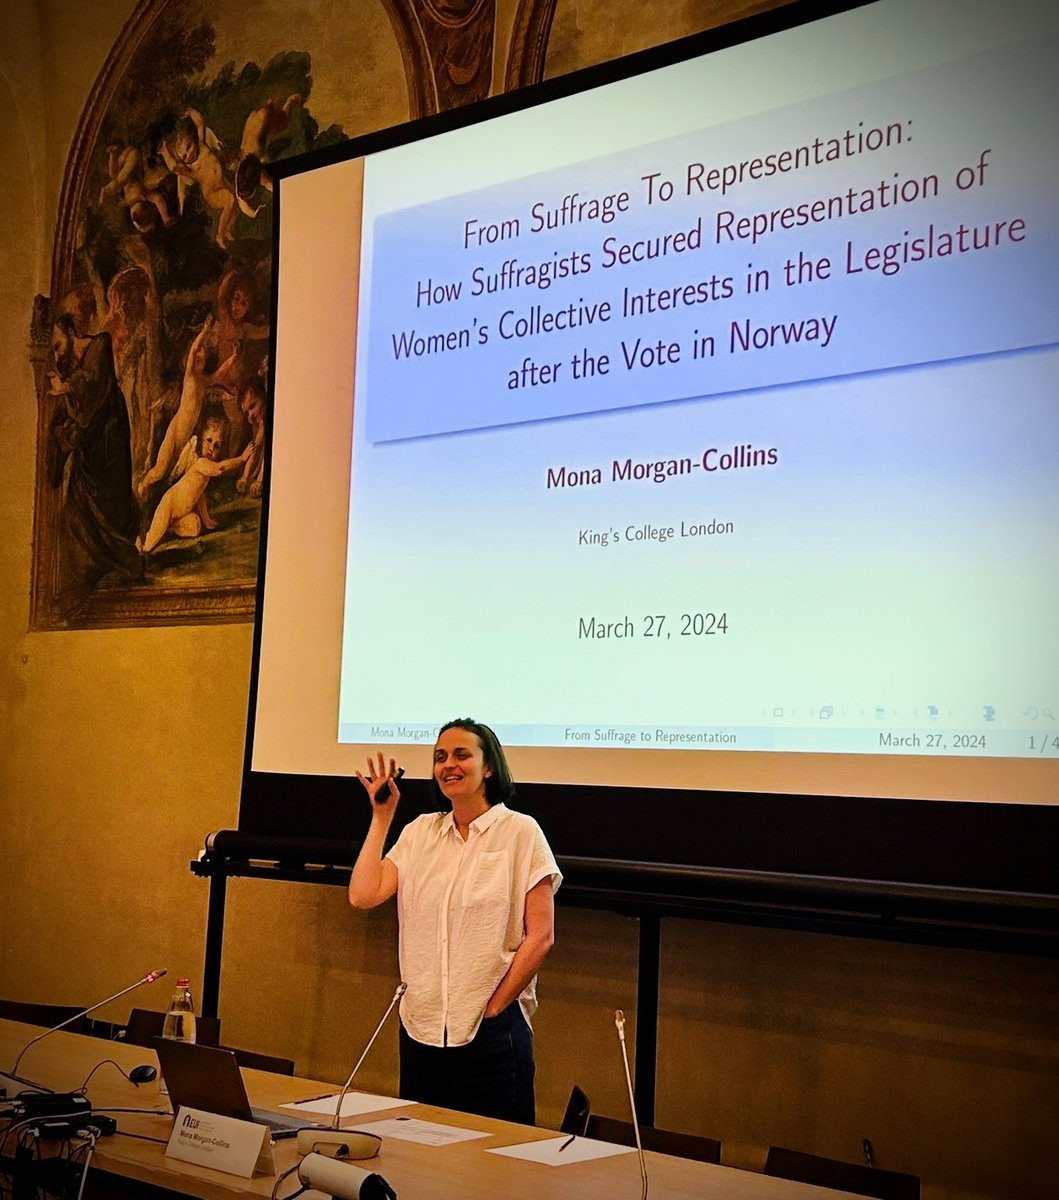 We are delighted to have Mona Morgan-Collins (@KingsCollegeLon) at the @EUI_EU! At today's session of the Swiss Chair Seminar Series, she is giving a talk on 'From suffrage to representation: How suffragists secured representation of women's collective interests in Norway'⤵️